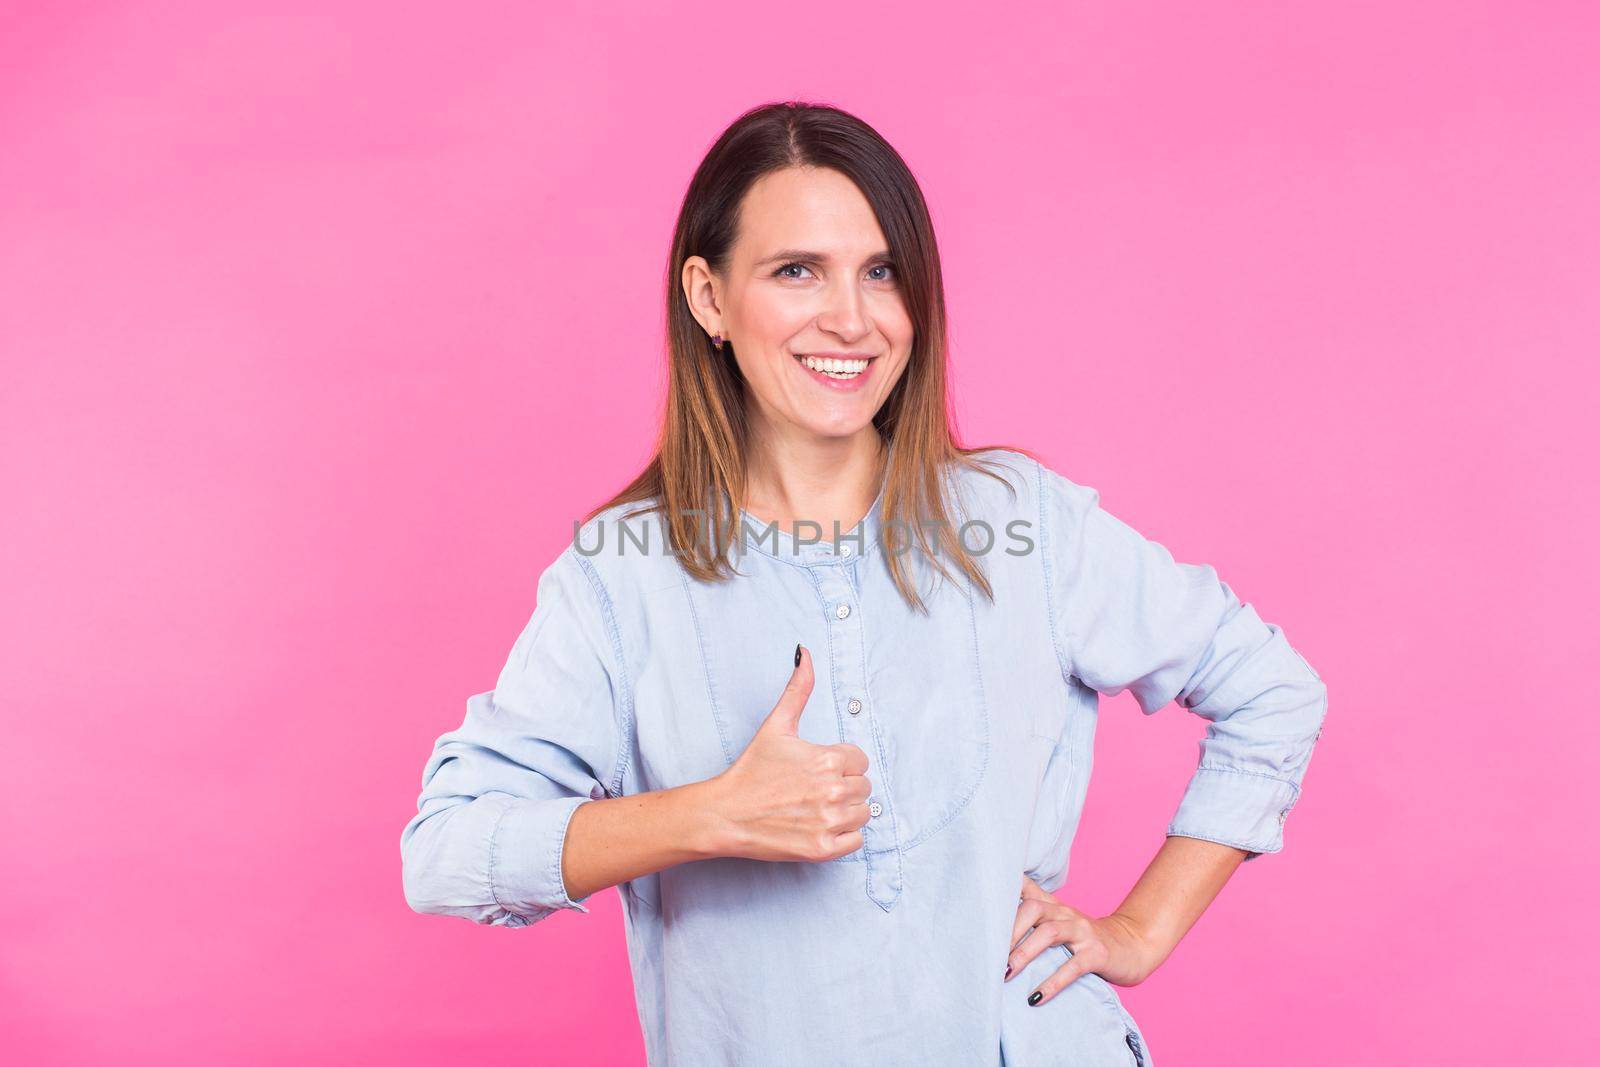 Portrait of a beautiful woman with long brown hair wearing blue cotton blouse showing thumbs up on a pink background by Satura86